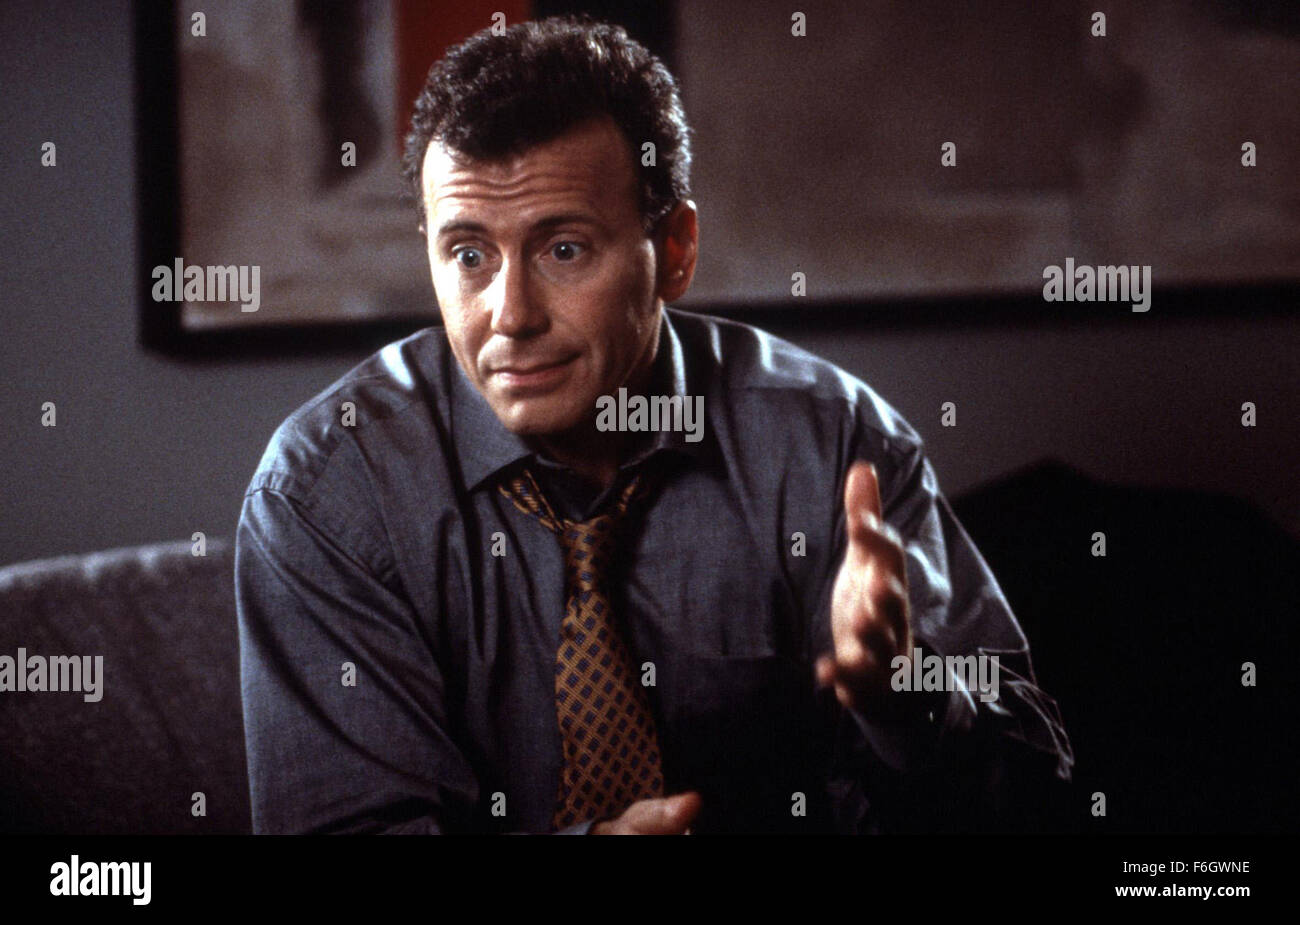 Aug 19, 2001; Hollywood, CA, USA; Image from director Harold Zwart's crime comedy 'One Night at McCool's' starring PAUL REISER as Carl. Stock Photo